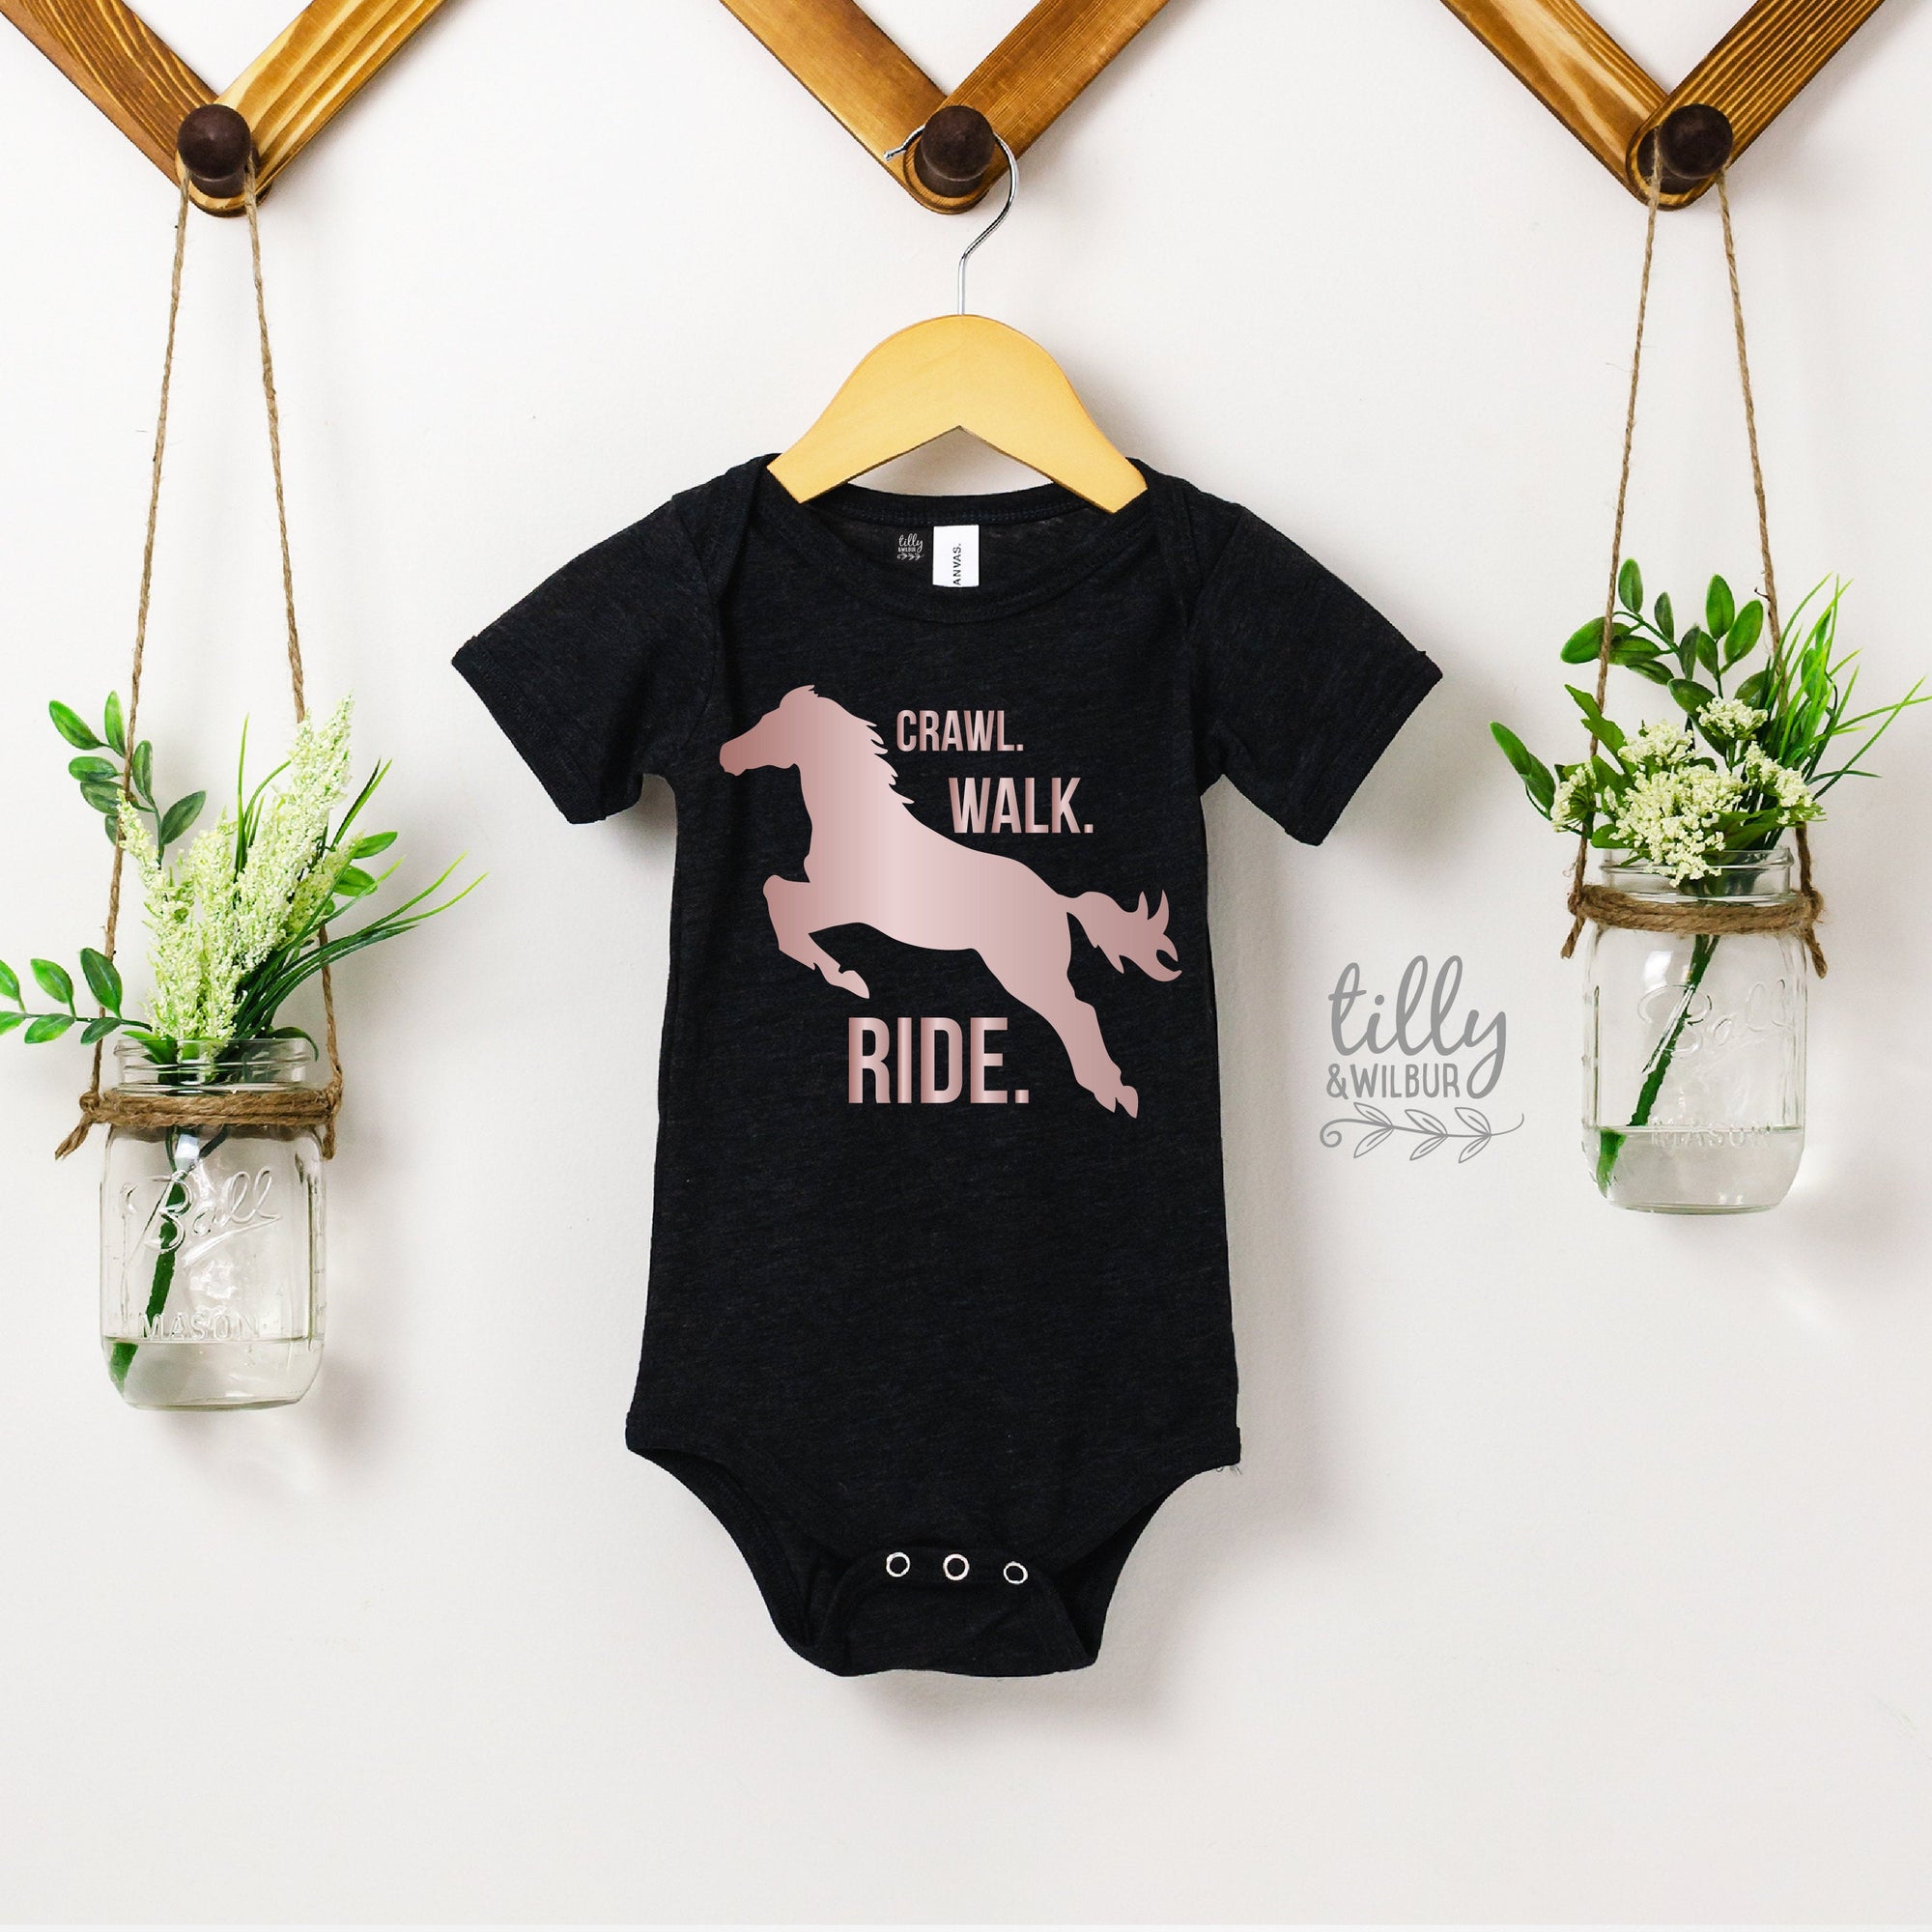 Crawl Walk Ride Bodysuit, New Baby Gift, Baby Shower Gift, Horse Riding Gift, Equestrian Gift, Horse Lover Gift, Horse Clothes, Cowboy Baby